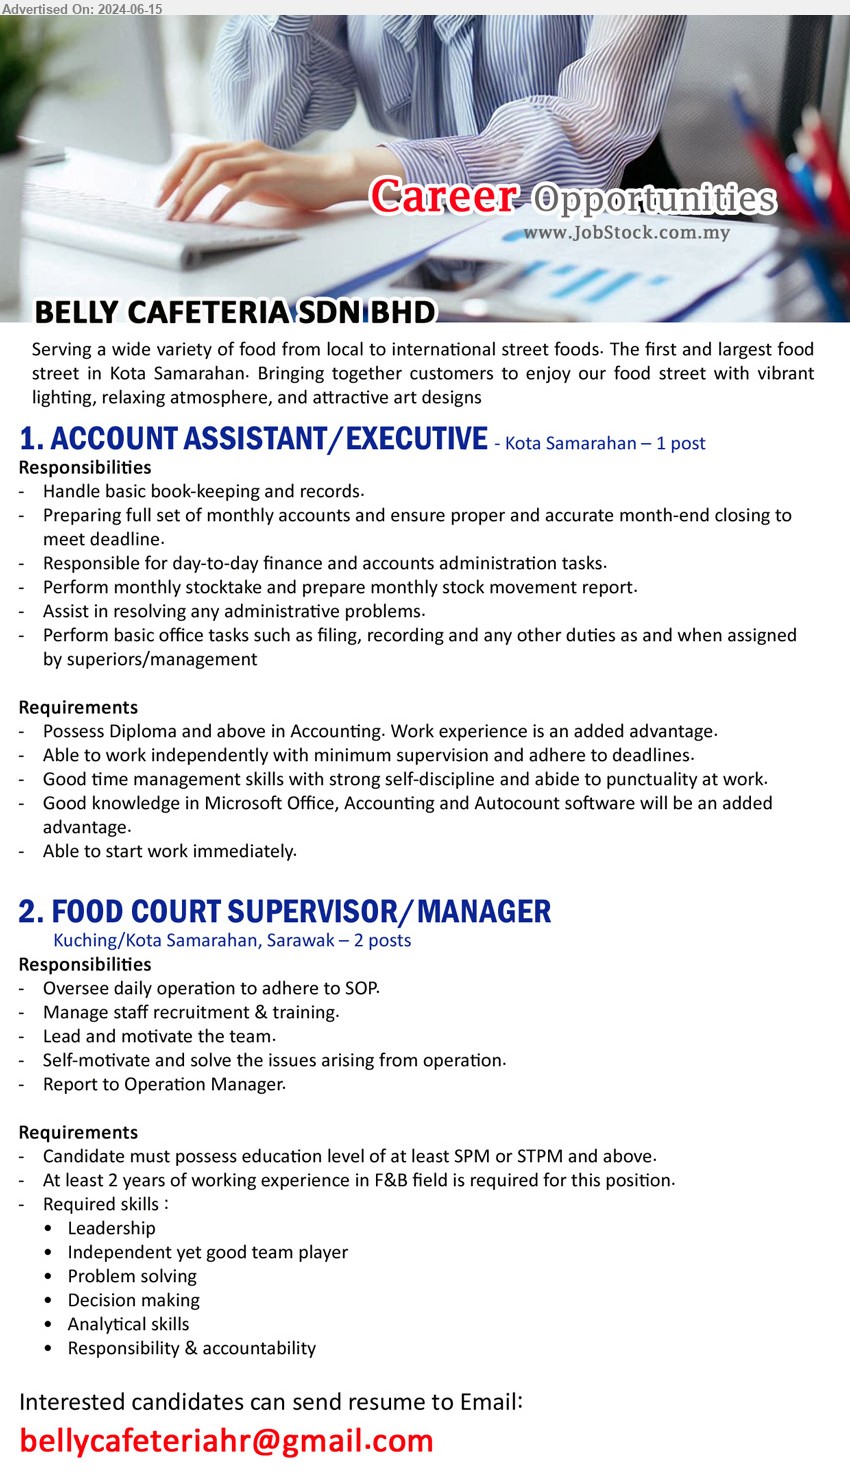 BELLY CAFETERIA SDN BHD - 1. ACCOUNT ASSISTANT/EXECUTIVE  (Kota Samarahan), Diploma and above in Accounting. Work experience, Good knowledge in Microsoft Office, Accounting and Autocount software ,...
2. FOOD COURT SUPERVISOR/MANAGER (Kuching / Kota Samarahan),  SPM or STPM and above, At least 2 years of working experience in F&B field ,...
Email resume to ...